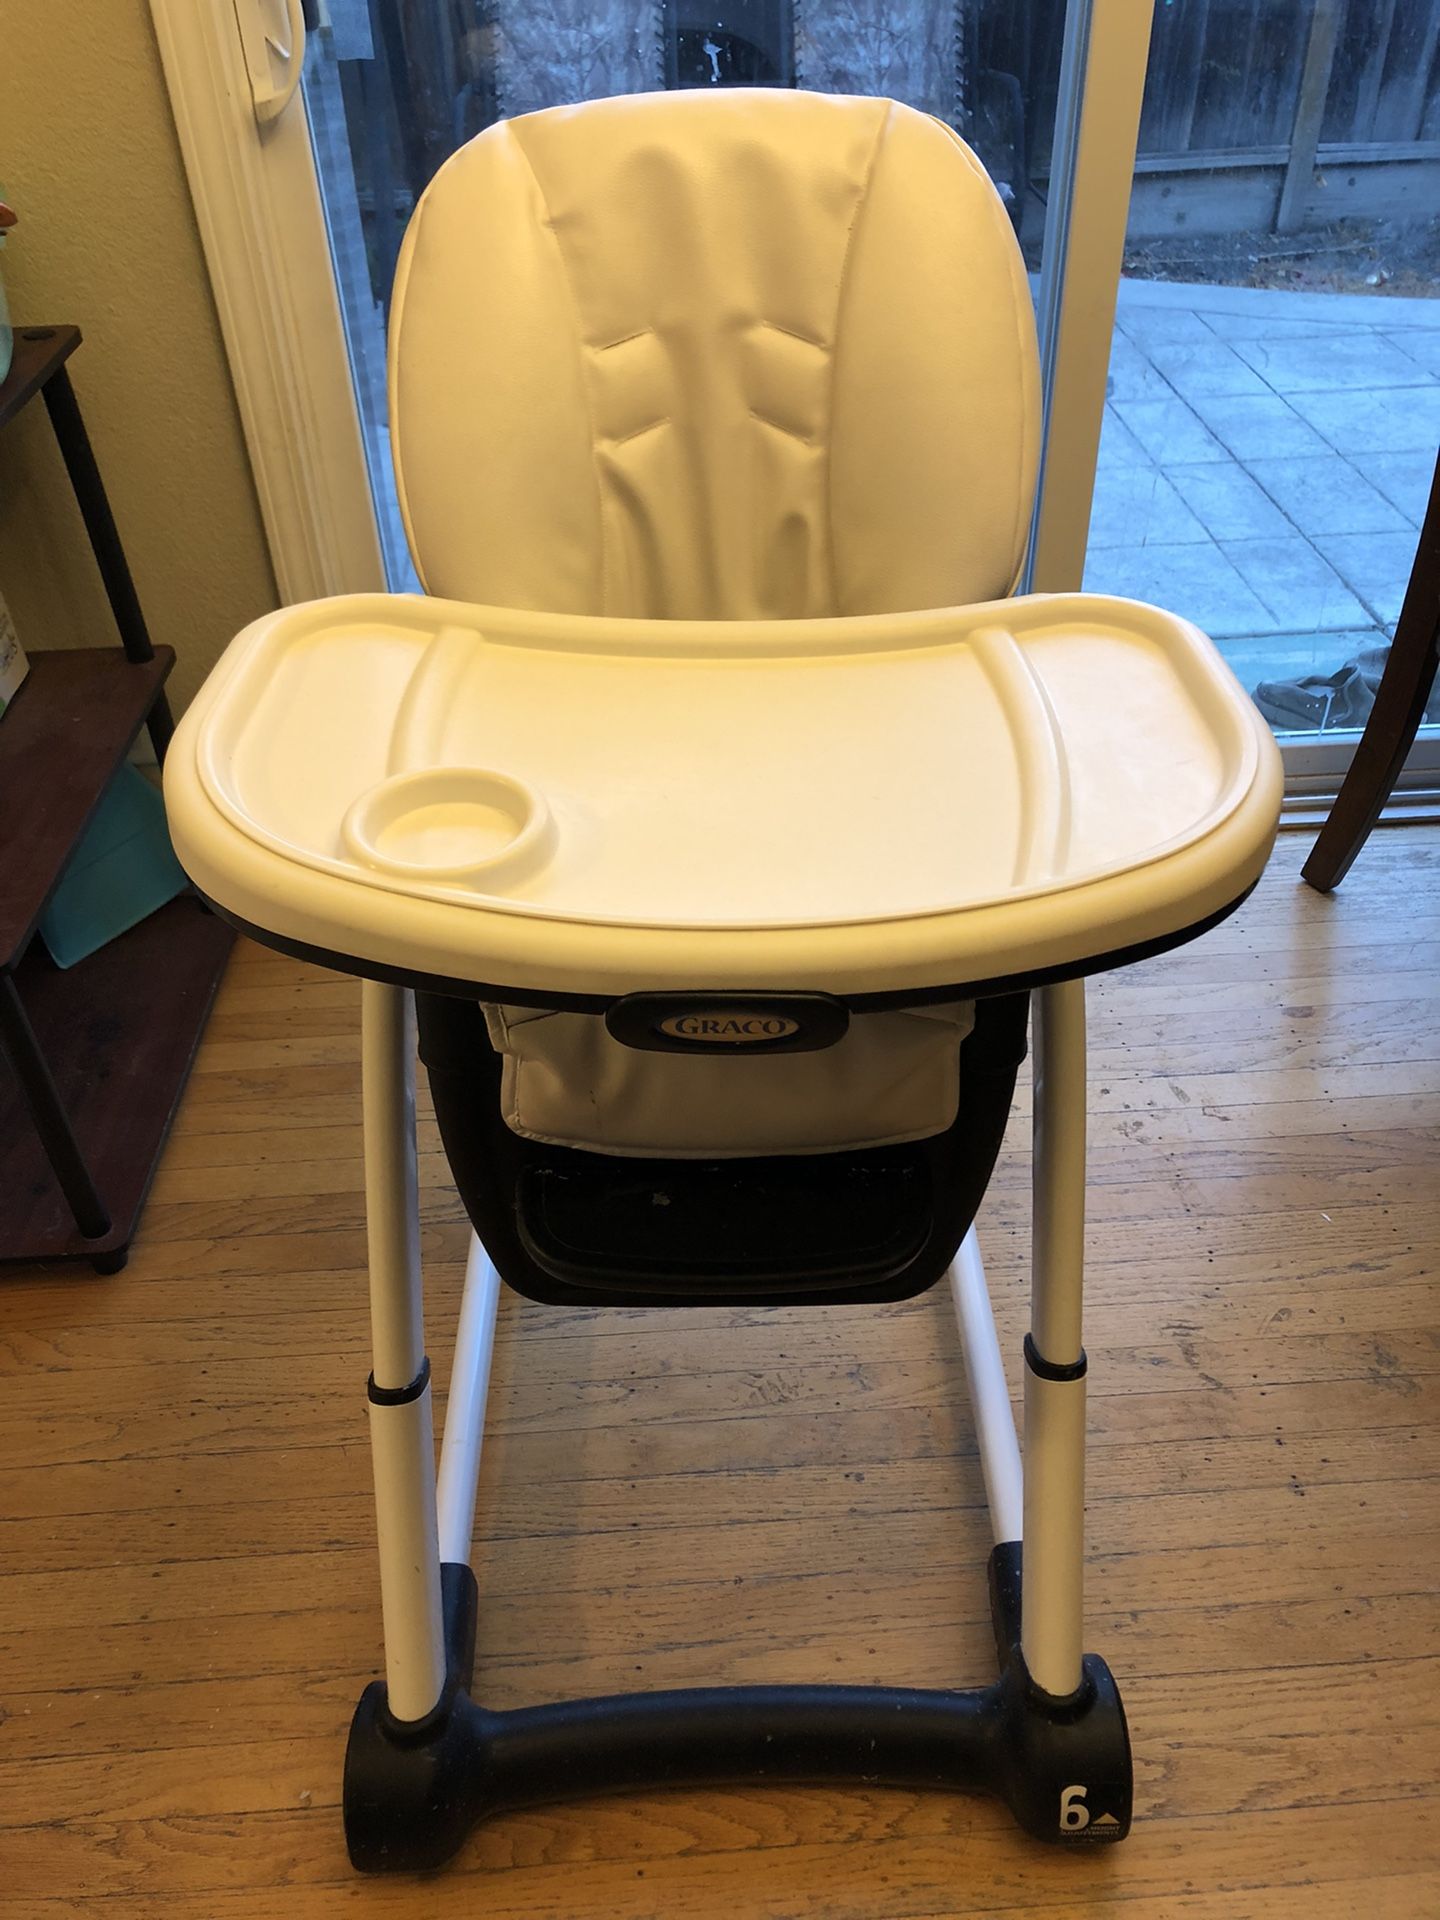 Baby High Chair, Graco, Great Condition